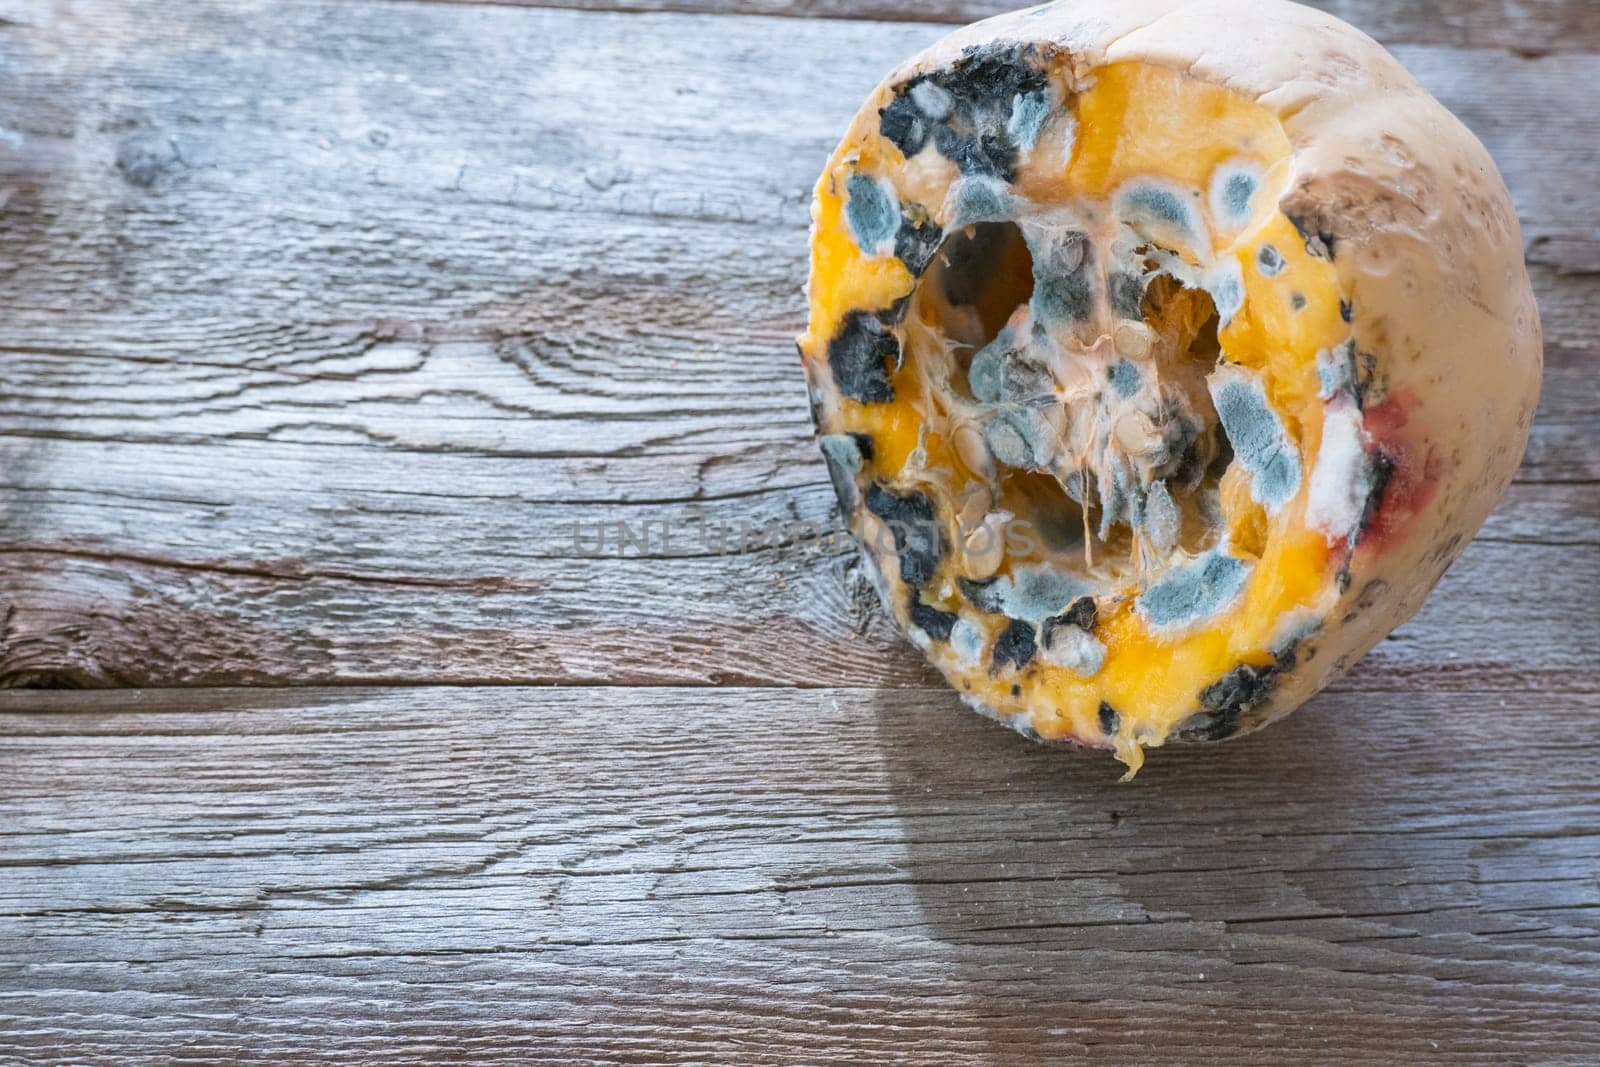 Orange moldy pumpkin on a wooden background. Mold and fungi on food, mold development, pests of stored vegetable products, a common problem